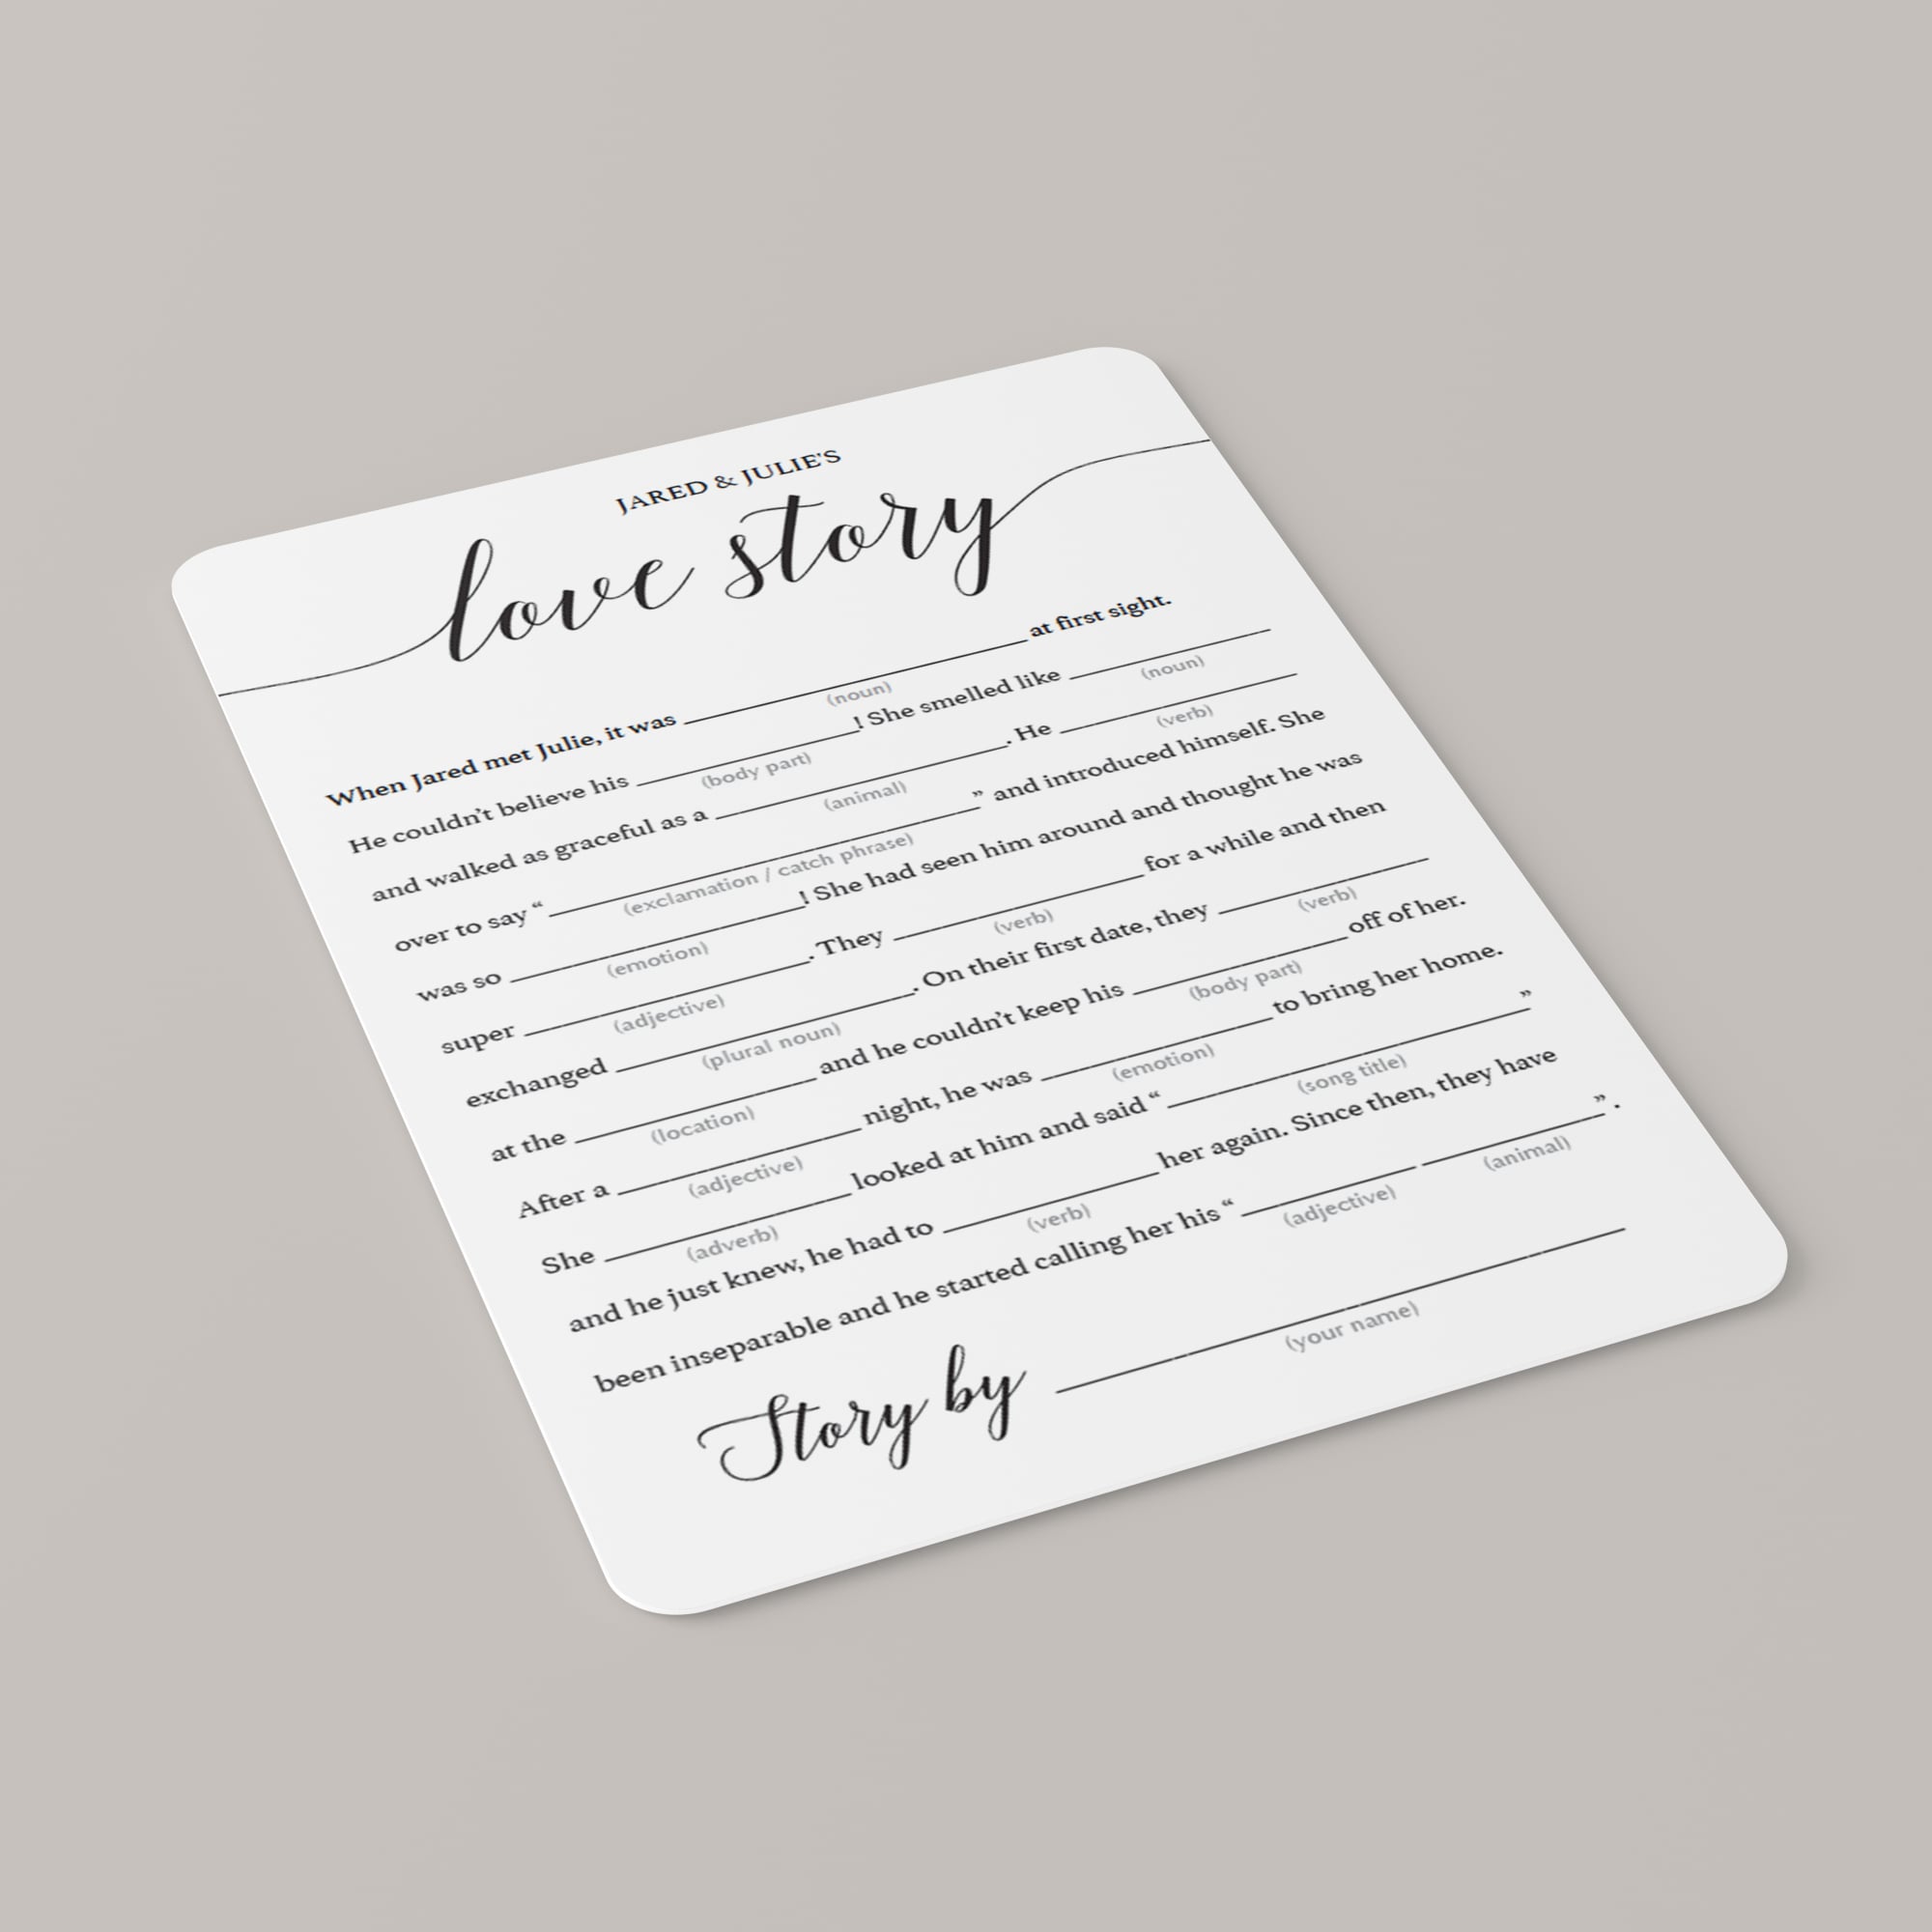 Love story mad libs bridal shower game by LittleSizzle